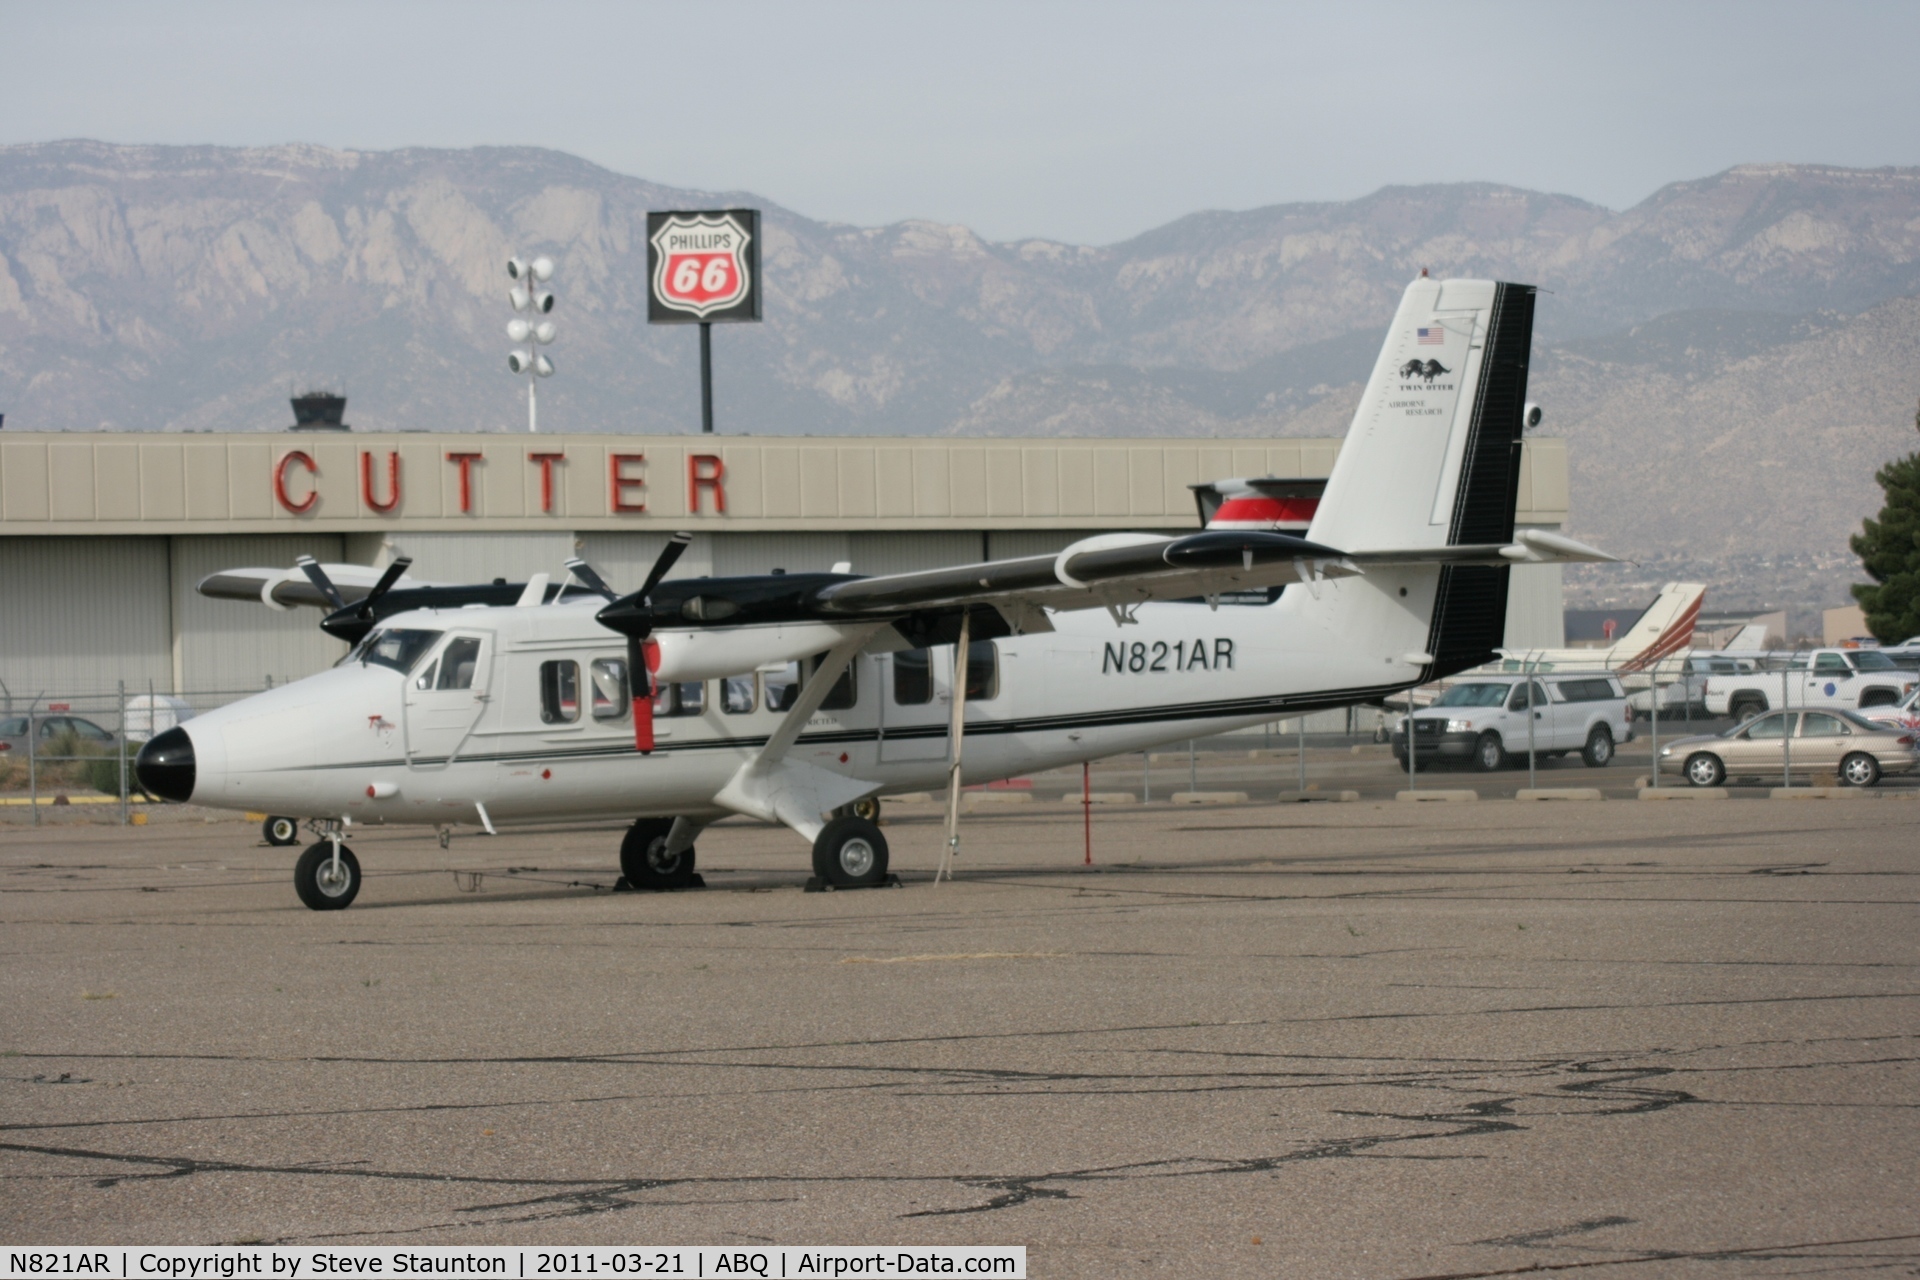 N821AR, 1974 De Havilland Canada DHC-6-300 Twin Otter C/N 421, Taken at Alburquerque International Sunport Airport, New Mexico in March 2011 whilst on an Aeroprint Aviation tour